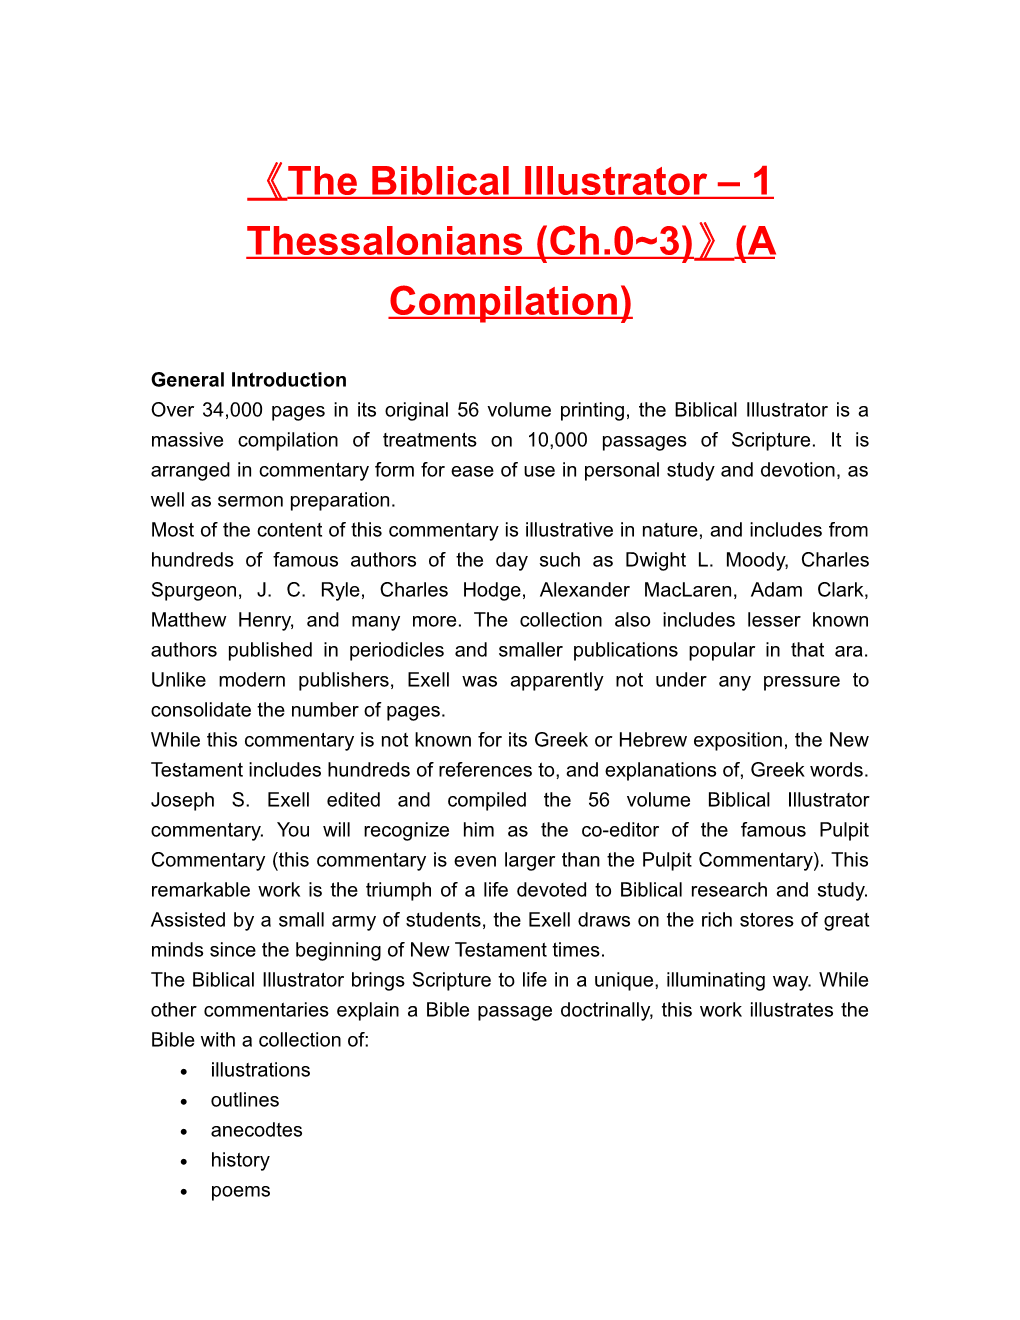 The Biblical Illustrator 1 Thessalonians (Ch.0 3) (A Compilation)